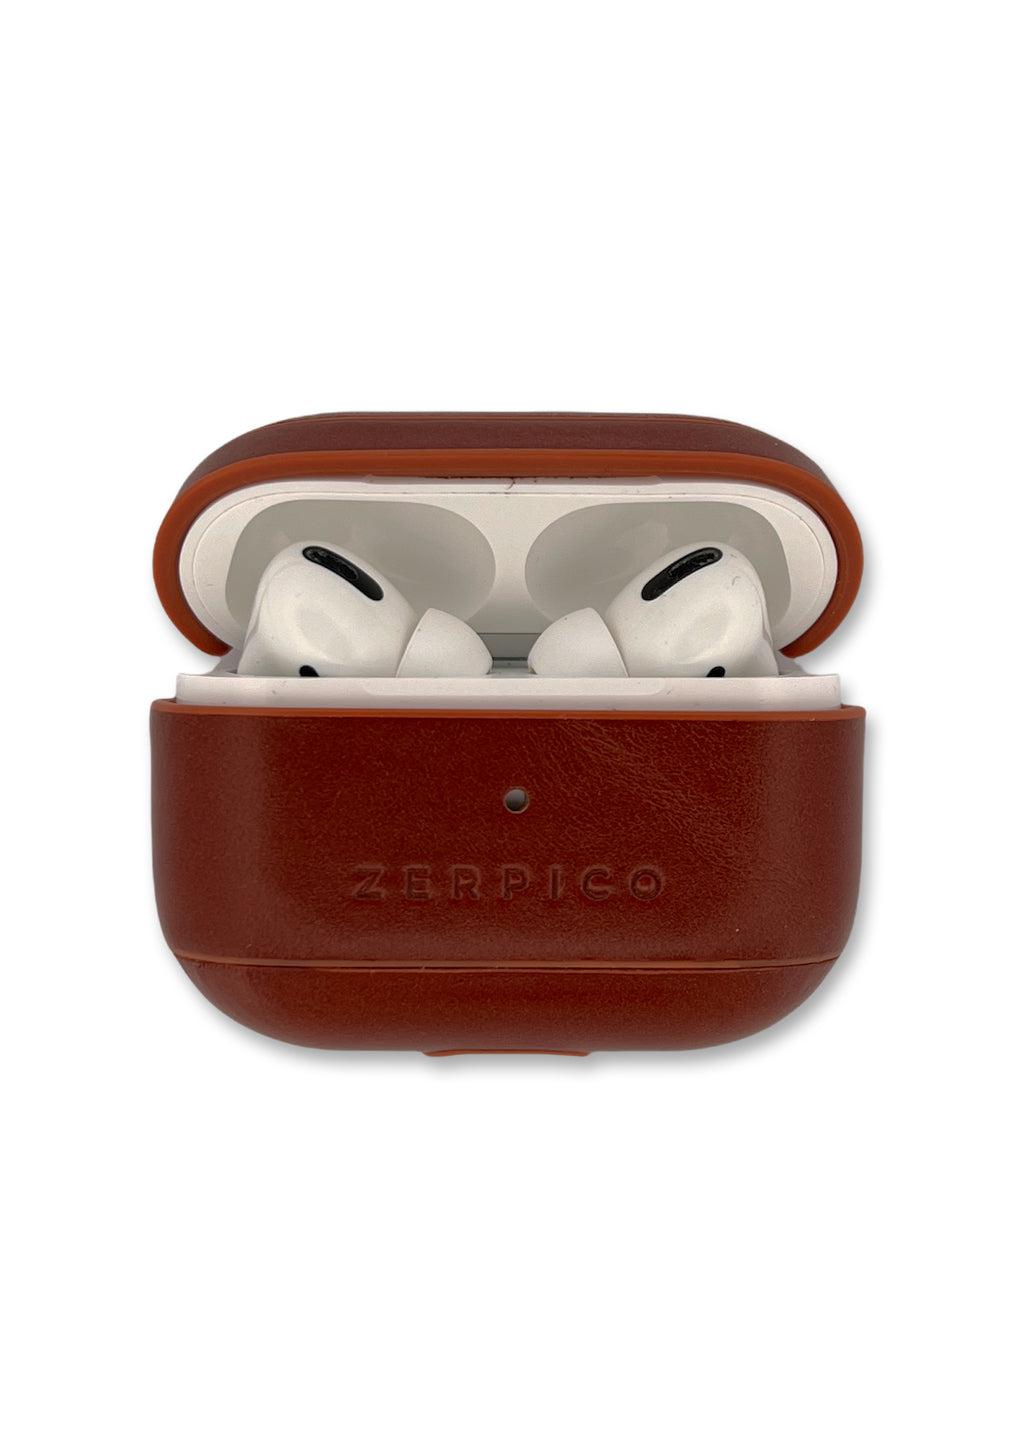 Zerpico Leather Airpods case. Studio shoot showing an open case.